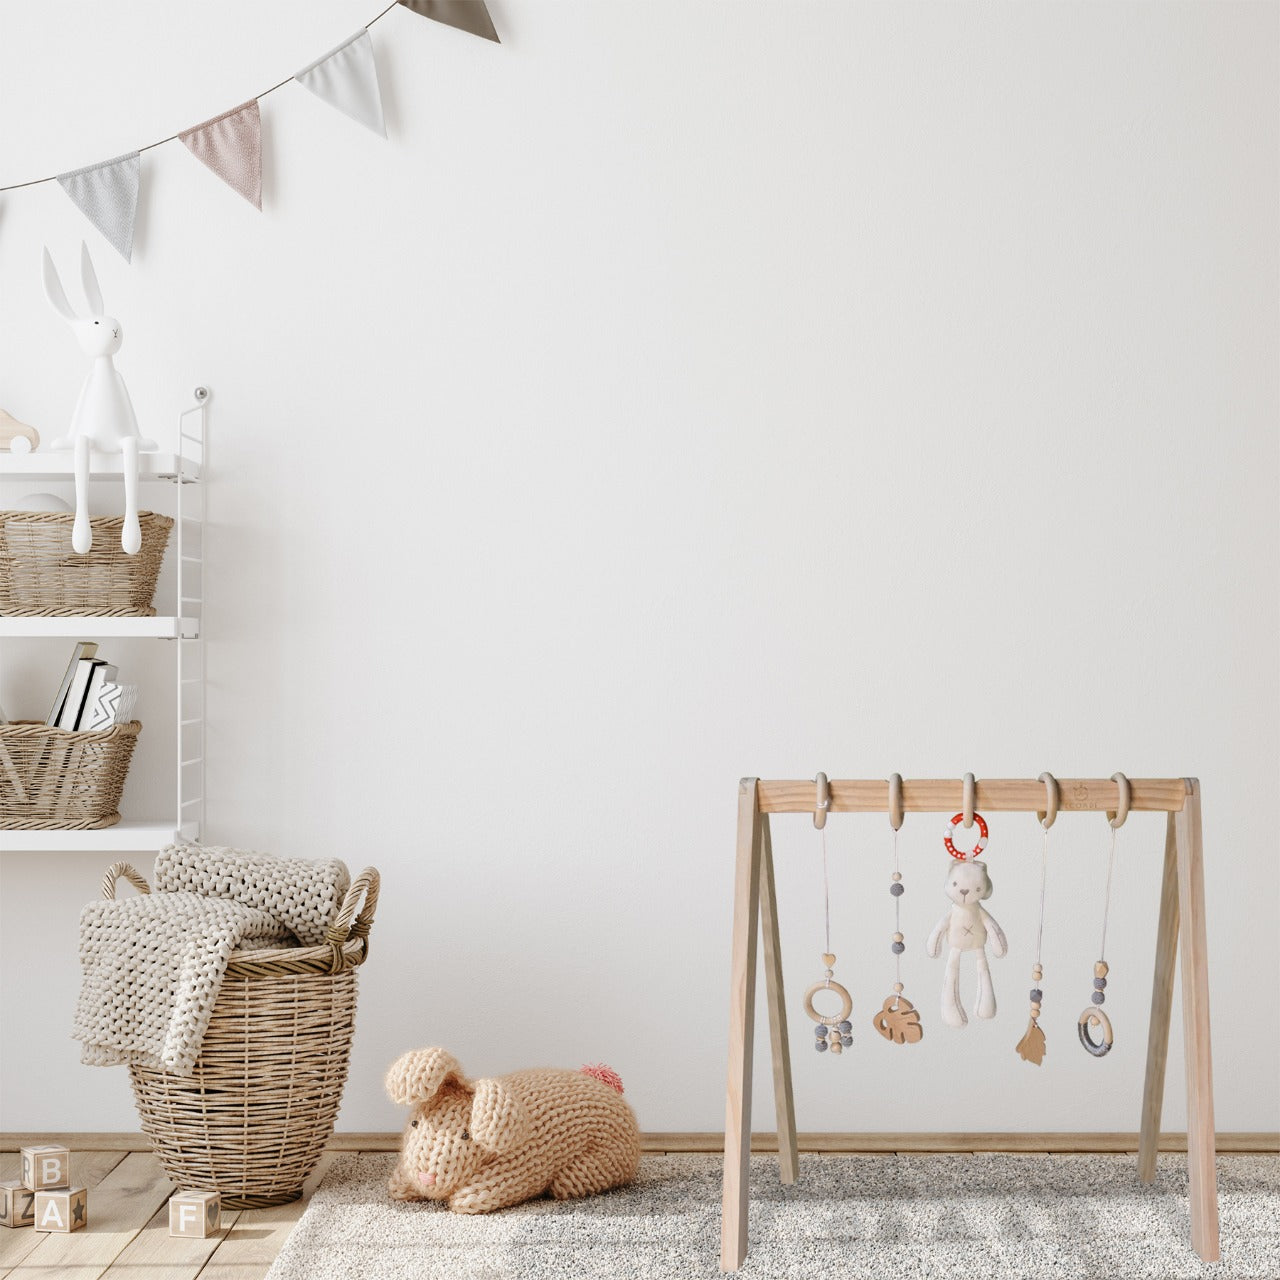 Wooden Play Gym - Activity Gym for Baby with 4 Hanging Wooden Baby Toys and 1 Bunny Rattle, Gender Neutral Boho Nursery Decor